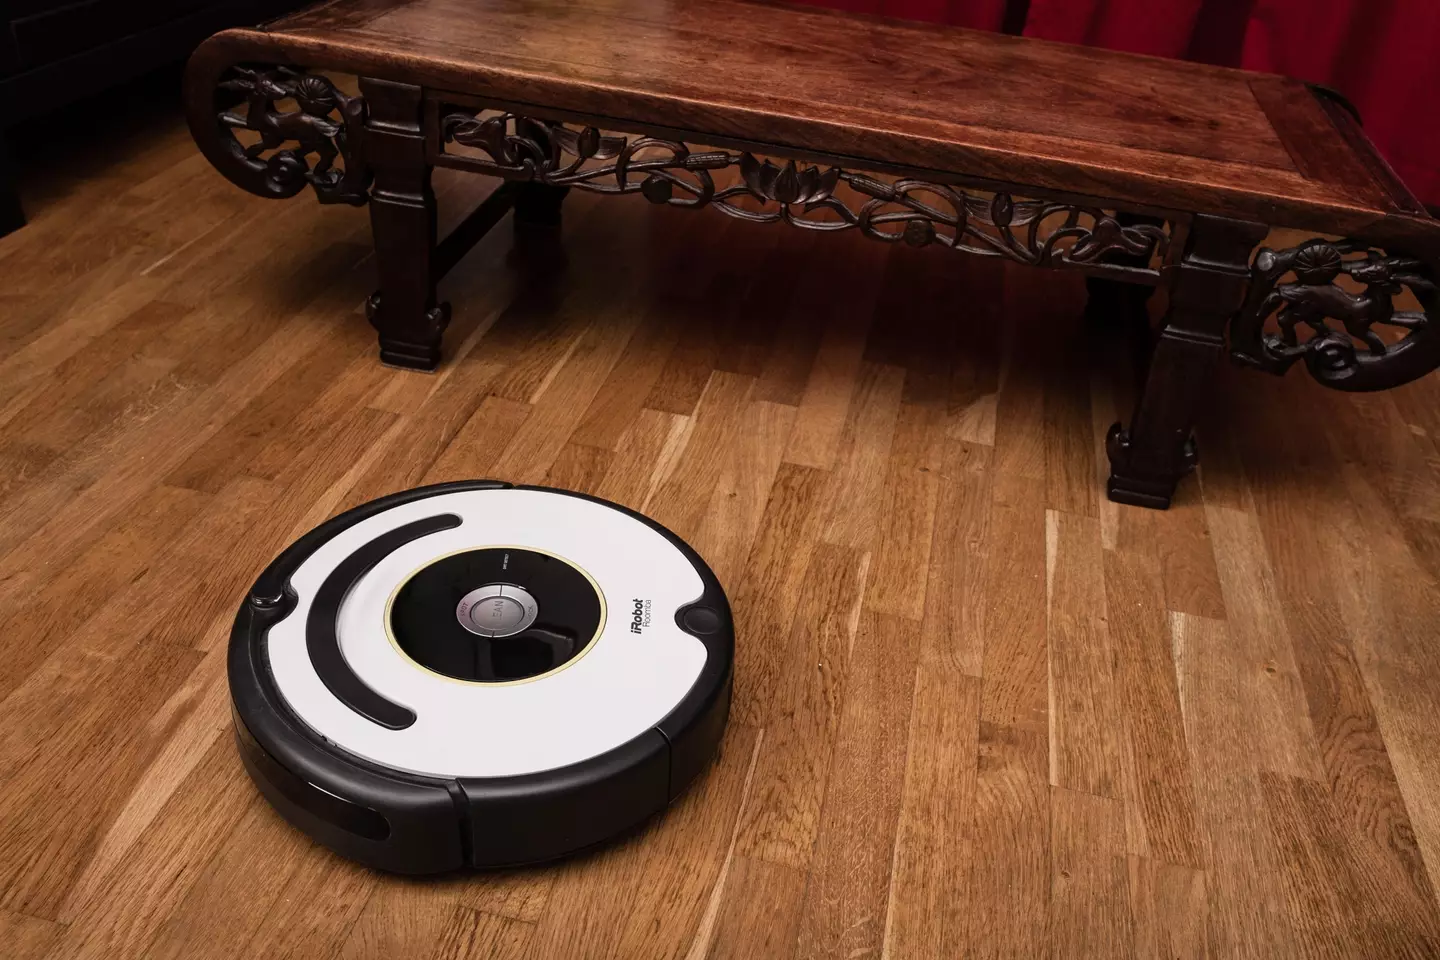 iRobot say this was done during a test to gather data to train AIs, and that they have terminated their partnership with the company responsible for the leak.